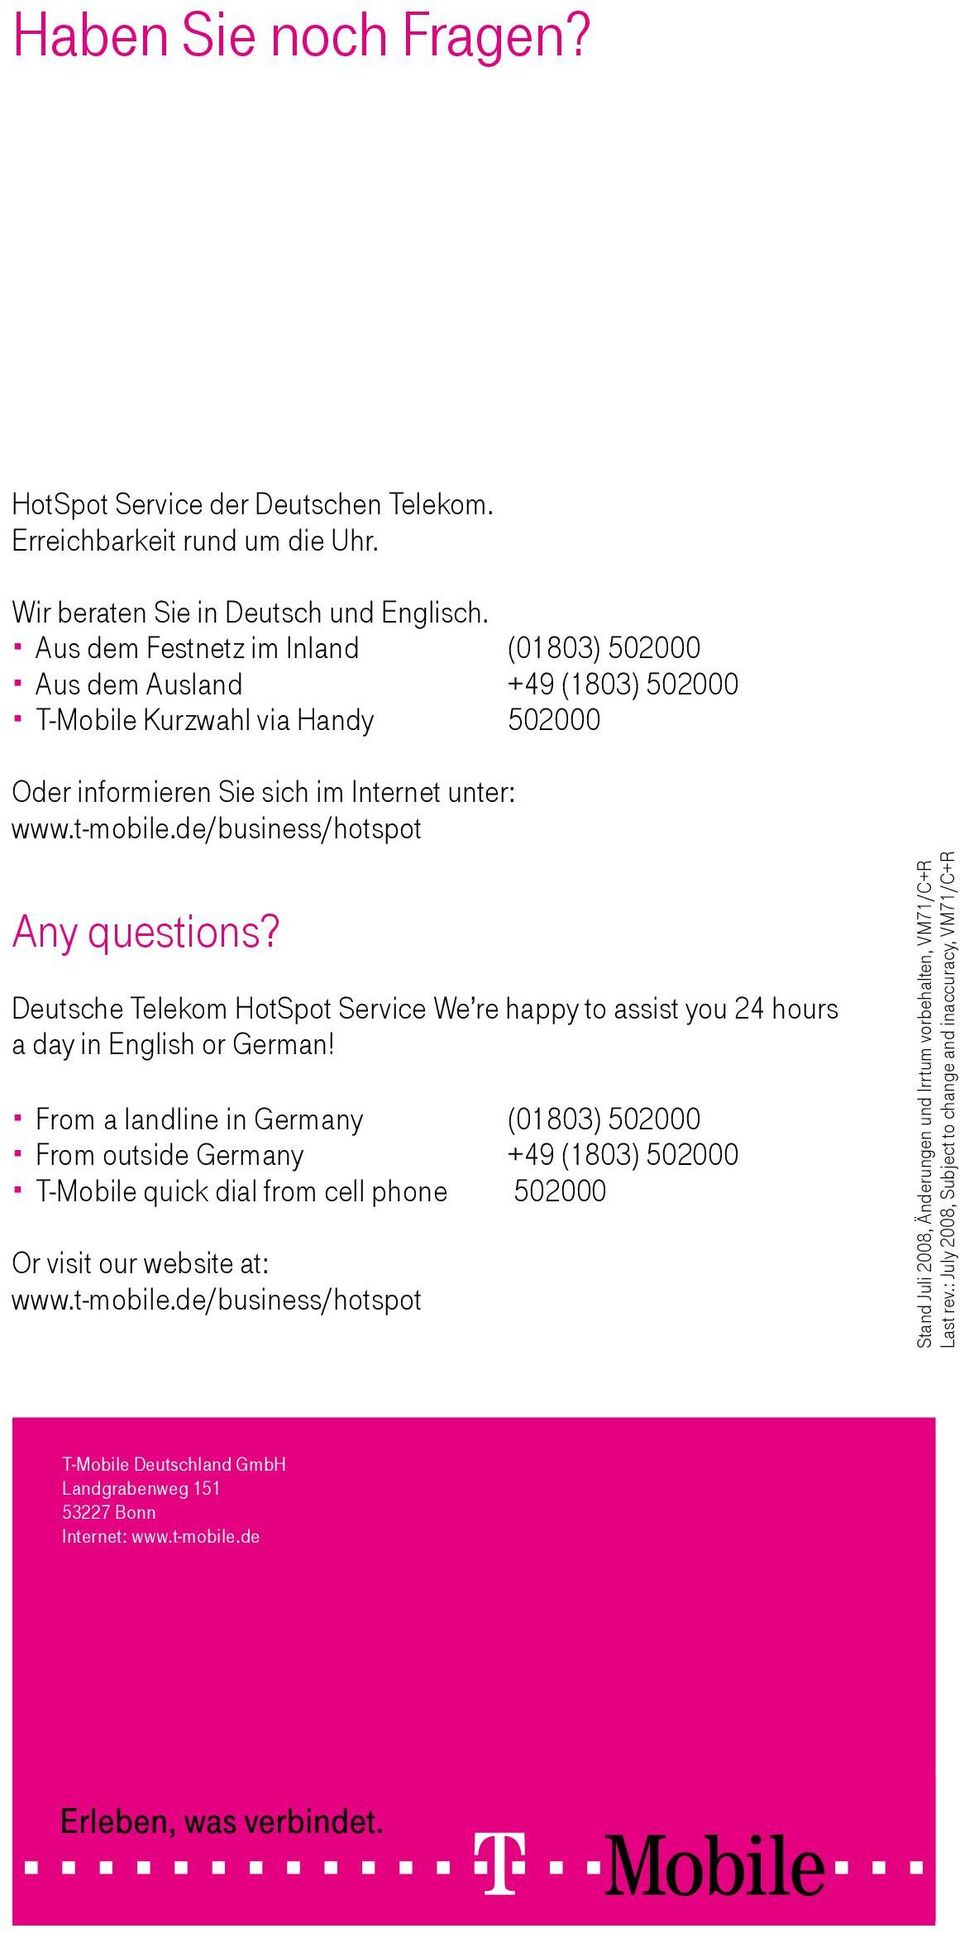 Deutsche Telekom HotSpot Service We re happy to assist you 24 hours a day in English or German!